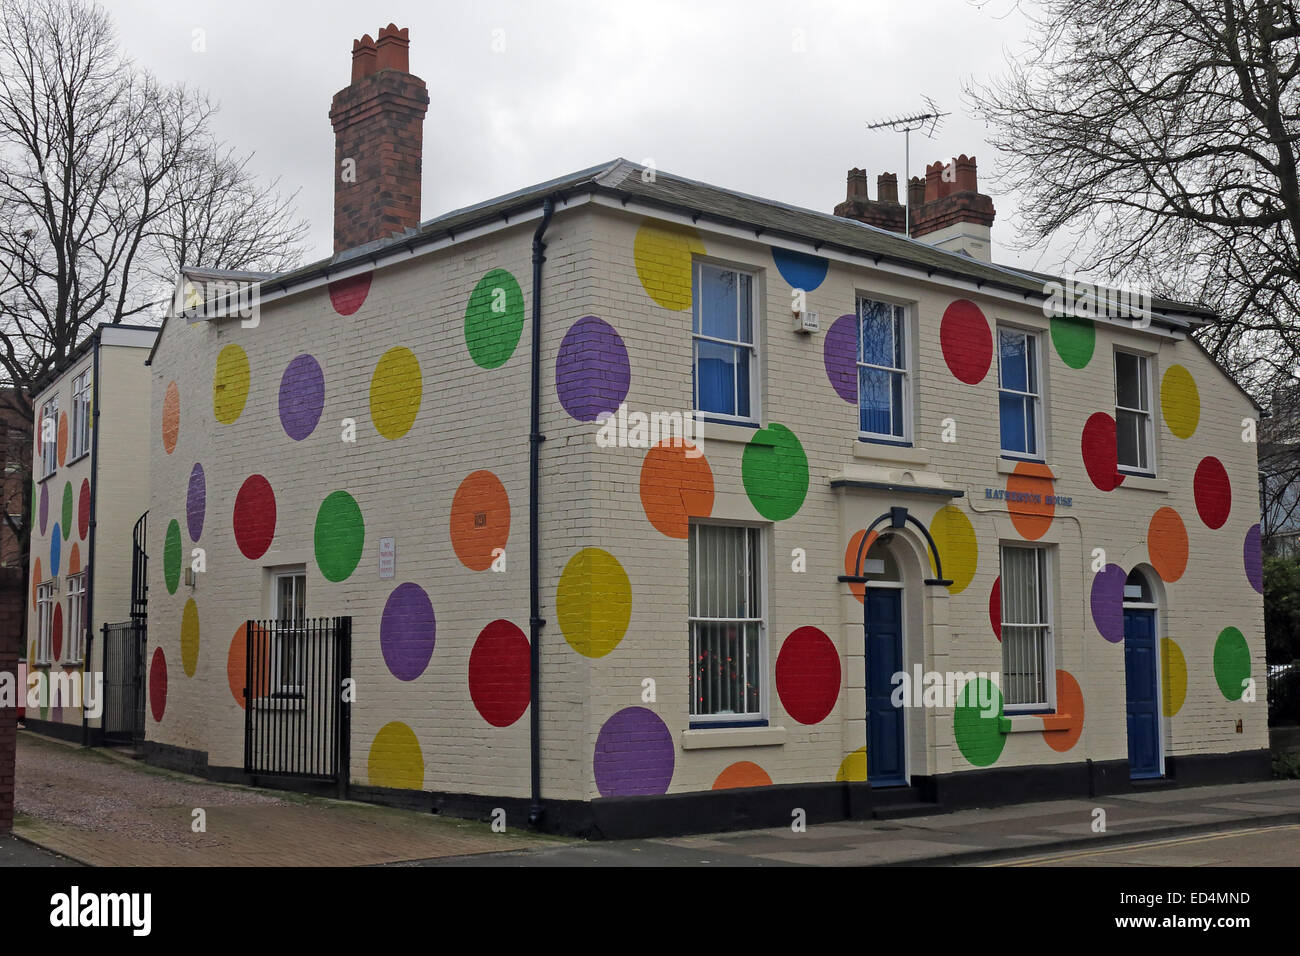 Hatherton House with spots Top-Marks building The Spotty Centre, Walsall, West Midlands, England, GB Stock Photo